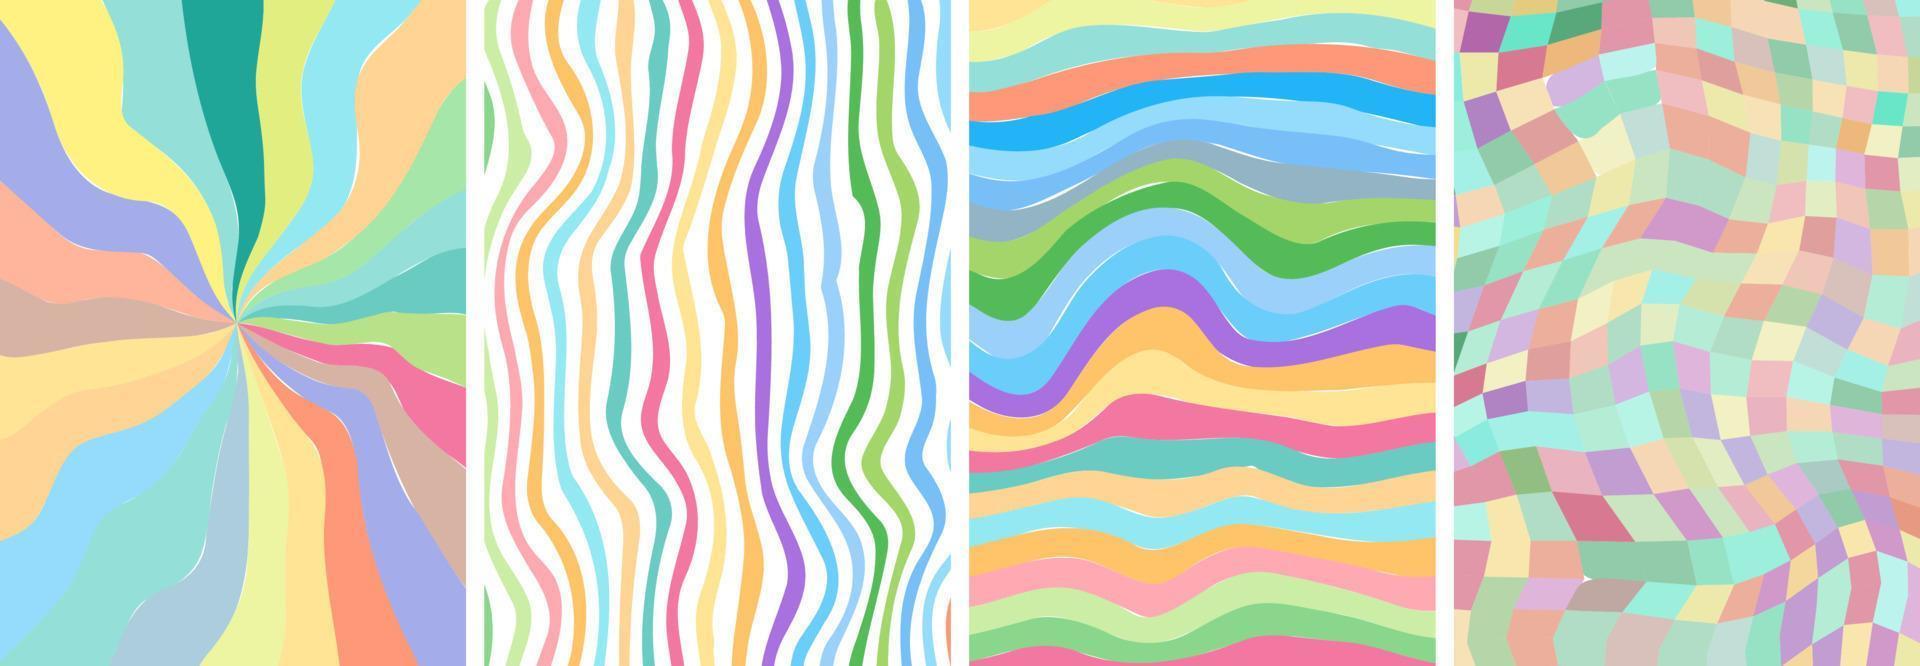 Retro groovy style color poster set. Psychedelic hippie swirl rainbow background collection. Vintage hippy crazy various twist and melt abstract placard. Trendy y2k pop culture bright design art. Eps vector